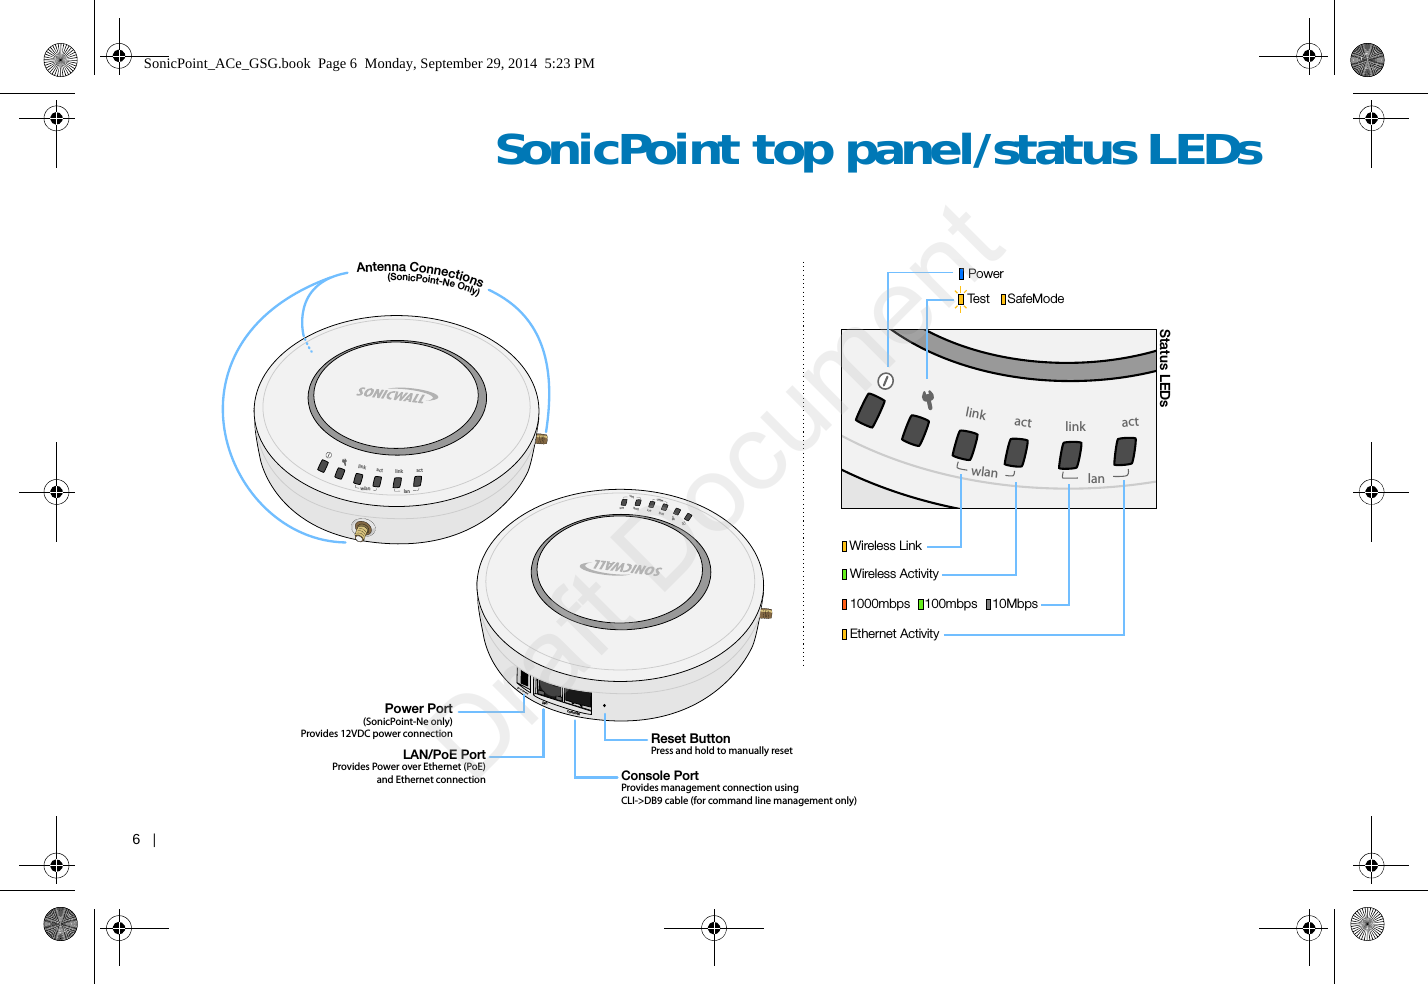 6   |   SonicPoint top panel/status LEDslinkwlanlanactlinkact  Antenna Connections              (SonicPoint-Ne Only)linkwlanlanactlinkactStatus LEDsPowerTest     SafeModeWireless LinkWireless Activity1000mbps    100mbps  10MbpsEthernet Activitylinkwlanlanactlinkact                        console                        lanPower Port(SonicPoint-Ne only)Provides 12VDC power connectionLAN/PoE PortProvides Power over Ethernet (PoE)and Ethernet connection Console PortProvides management connection usingCLI-&gt;DB9 cable (for command line management only)Reset ButtonPress and hold to manually resetSonicPoint_ACe_GSG.book  Page 6  Monday, September 29, 2014  5:23 PMDraft Document